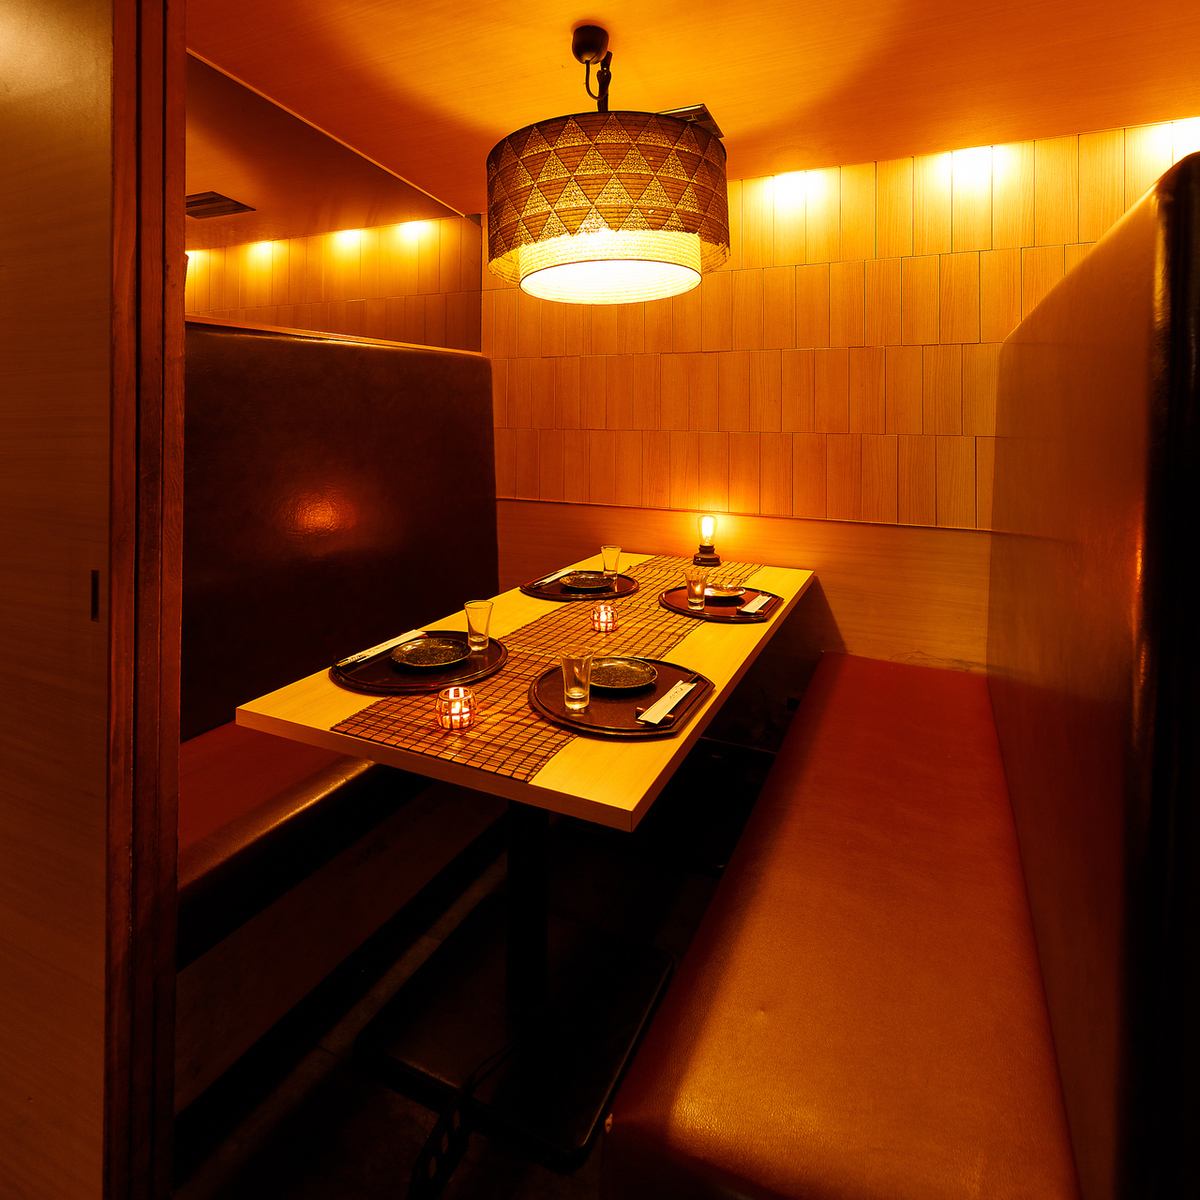 Our private rooms, which are fully equipped to prevent infectious diseases, are popular ♪ Now you can get grilled meat sushi as a gift ★